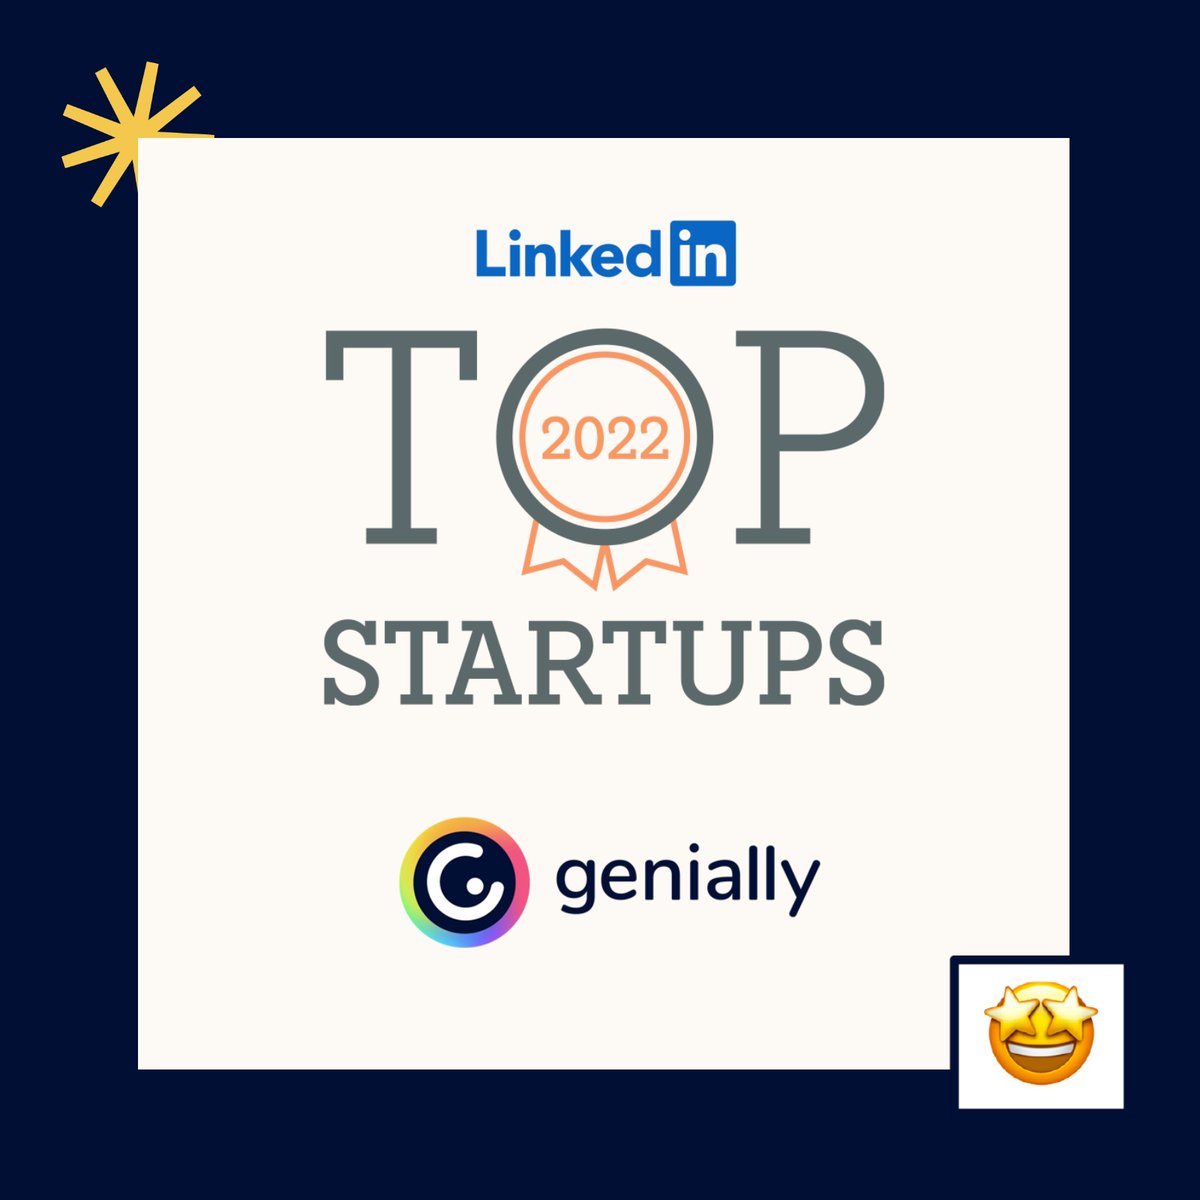 Great news to share: @LinkedIn has selected us as one of the #LinkedInTopStartups!🚀 We’re delighted to be included on this very special list. Thank you to our community for making this possible and to our #GeniallyTeam for their commitment! Read more: linkedin.com/feed/update/ur…